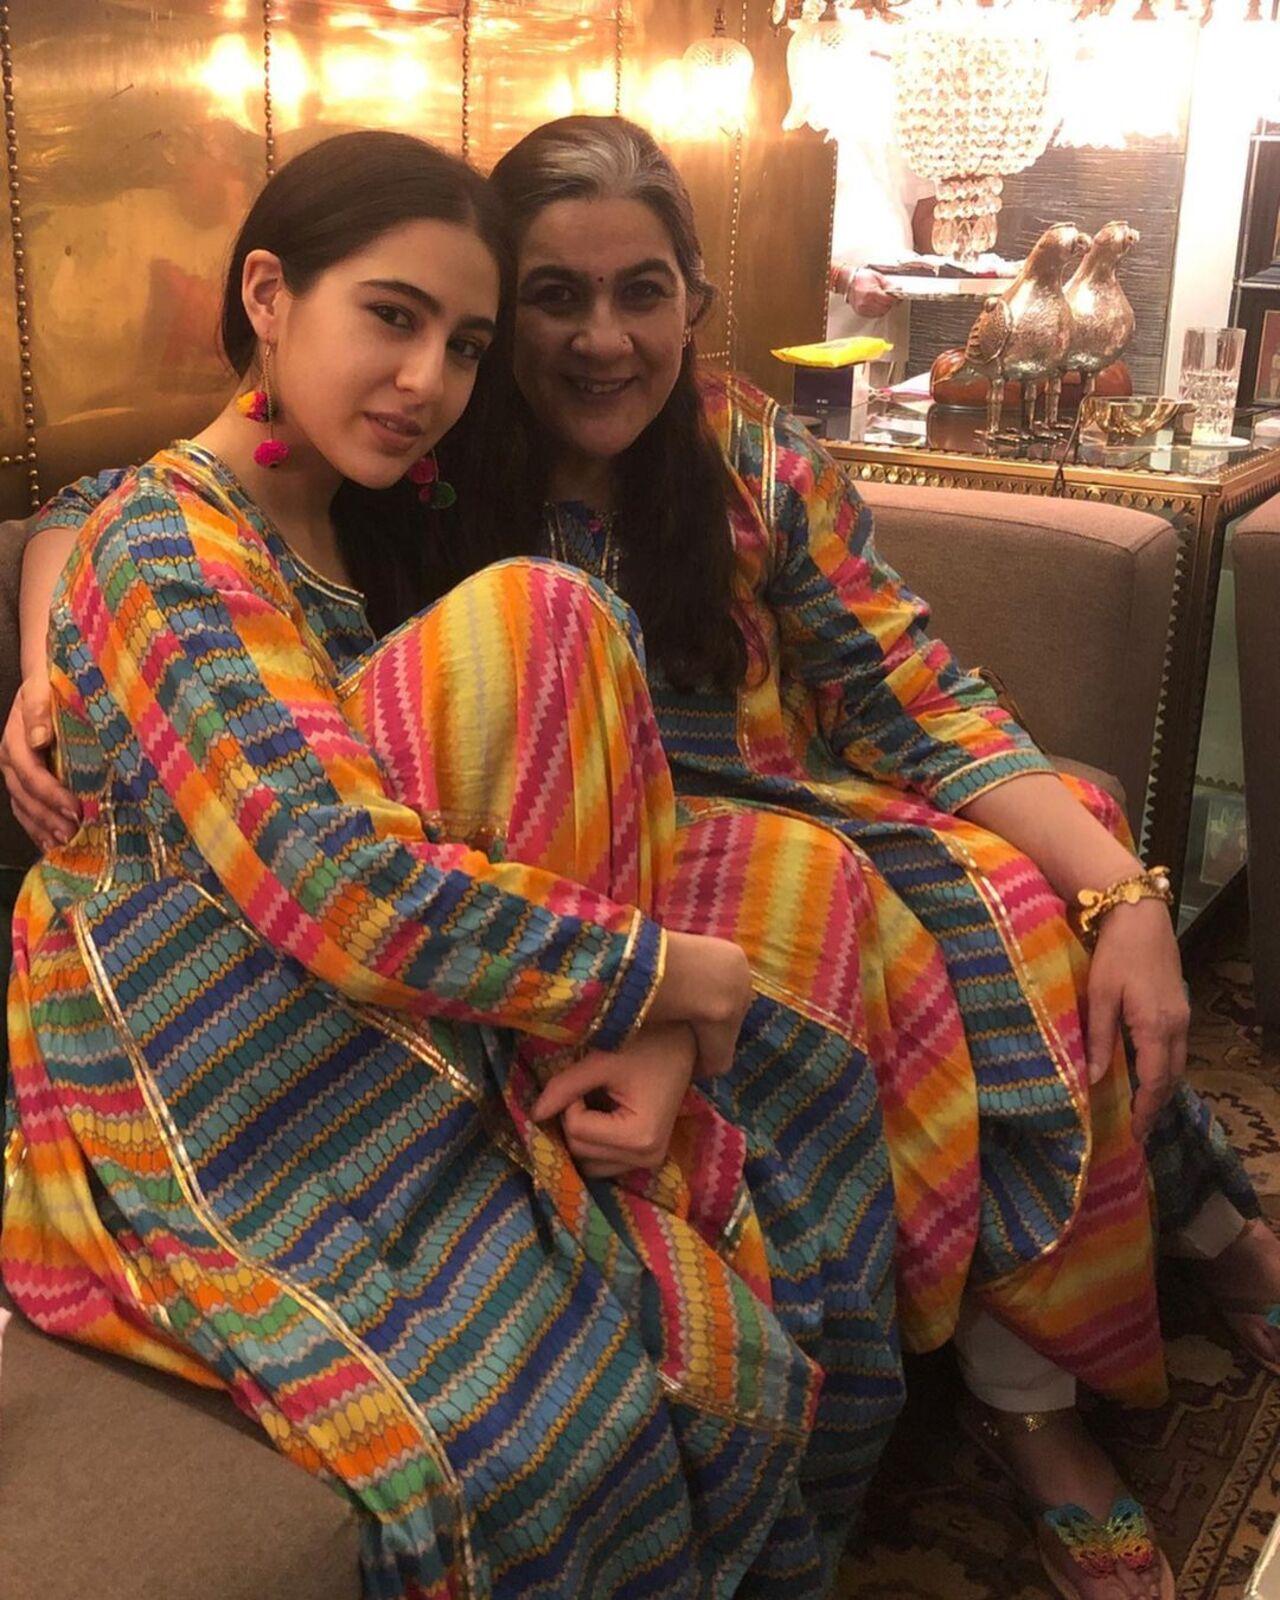 Twinning and winning, Sara Ali Khan posted this picture with her mother from their day outing 